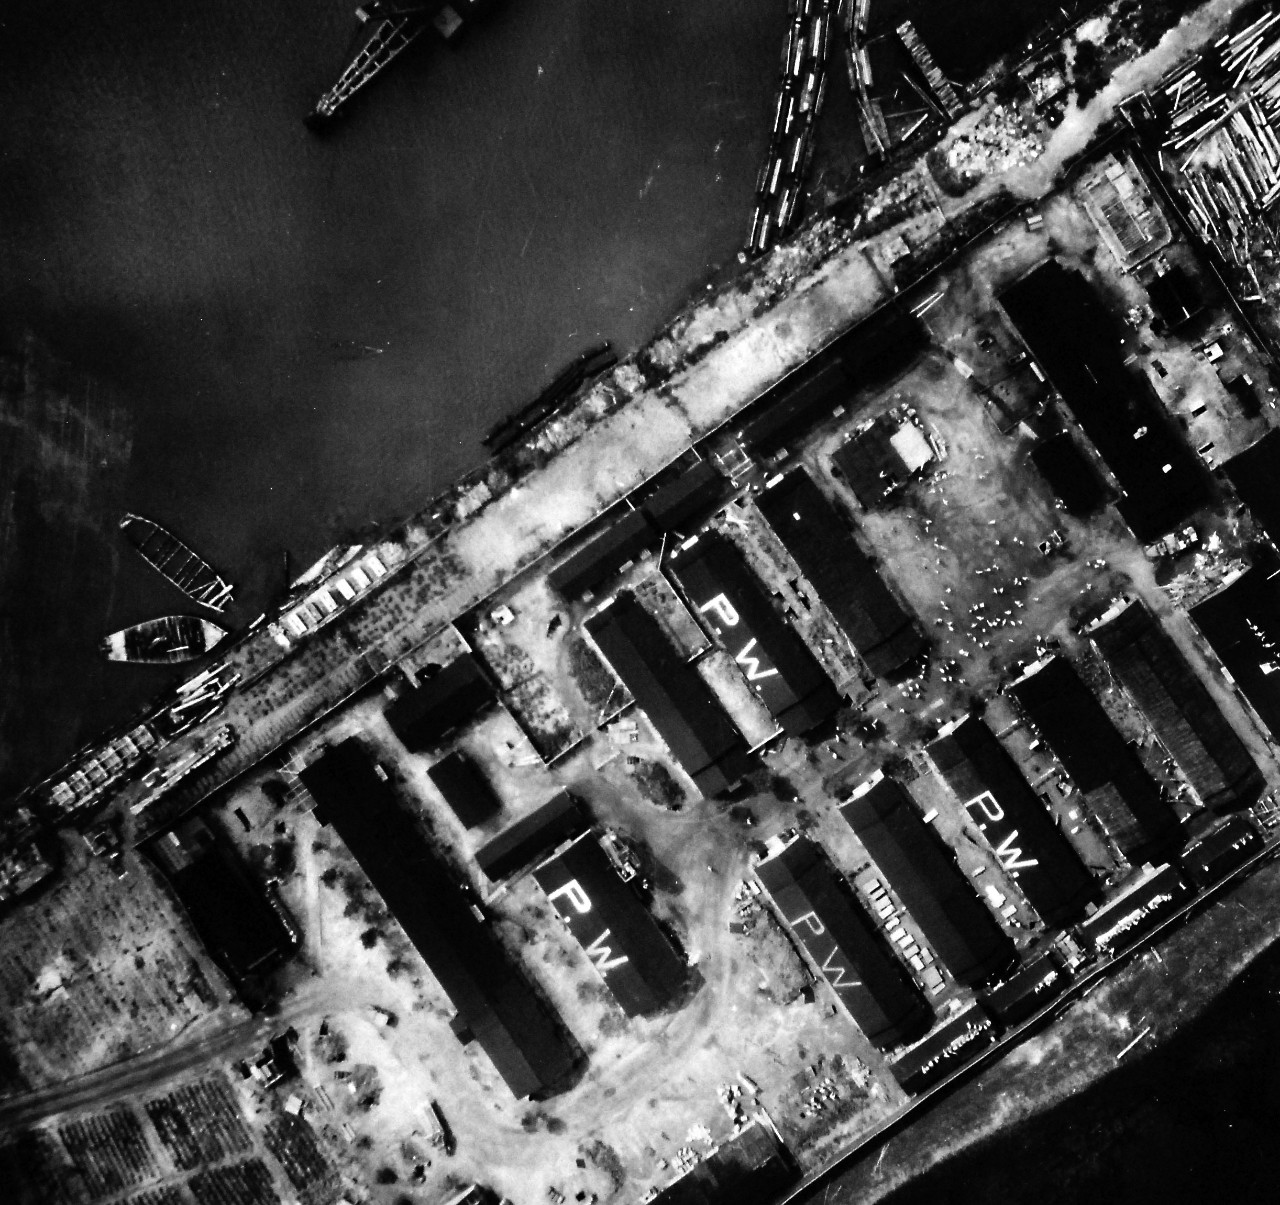 80-G-339303:  Allied Prisoner of War Camp, Tokyo, 1945.  Aerial of Prisoner of War camps, Tokyo area.    Photograph by USS Independence (CVL-22), August 25, 1945.  Official U.S. Navy Photograph, now in the collections of the National Archives.  (2016/11/09).  